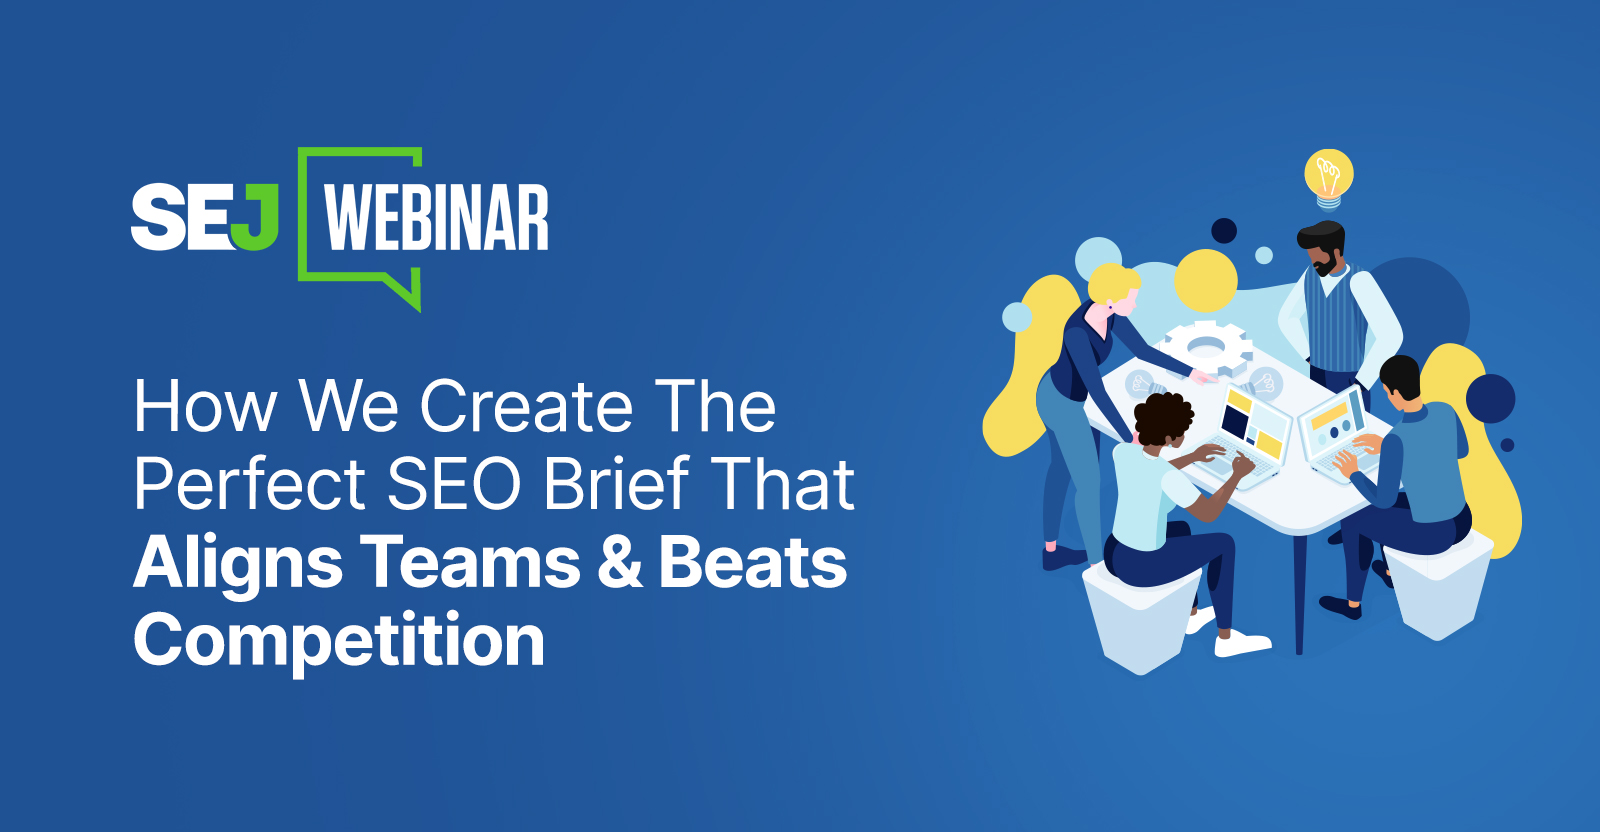 The Perfect SEO Brief That Aligns Teams & Beats Competition [Webinar]